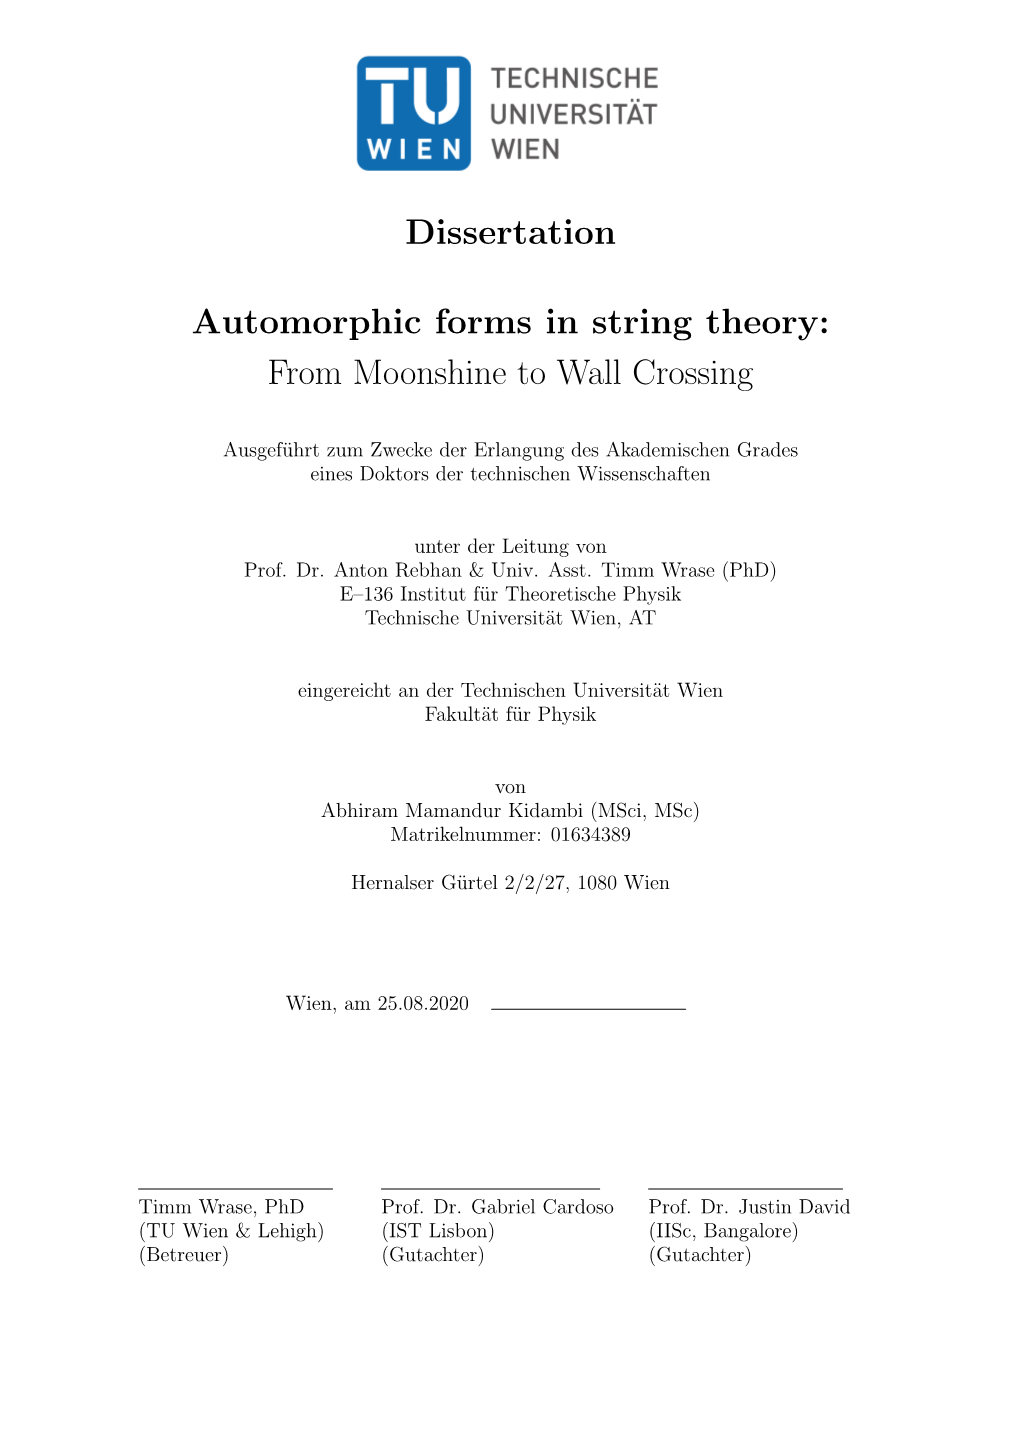 Dissertation Automorphic Forms in String Theory: from Moonshine To